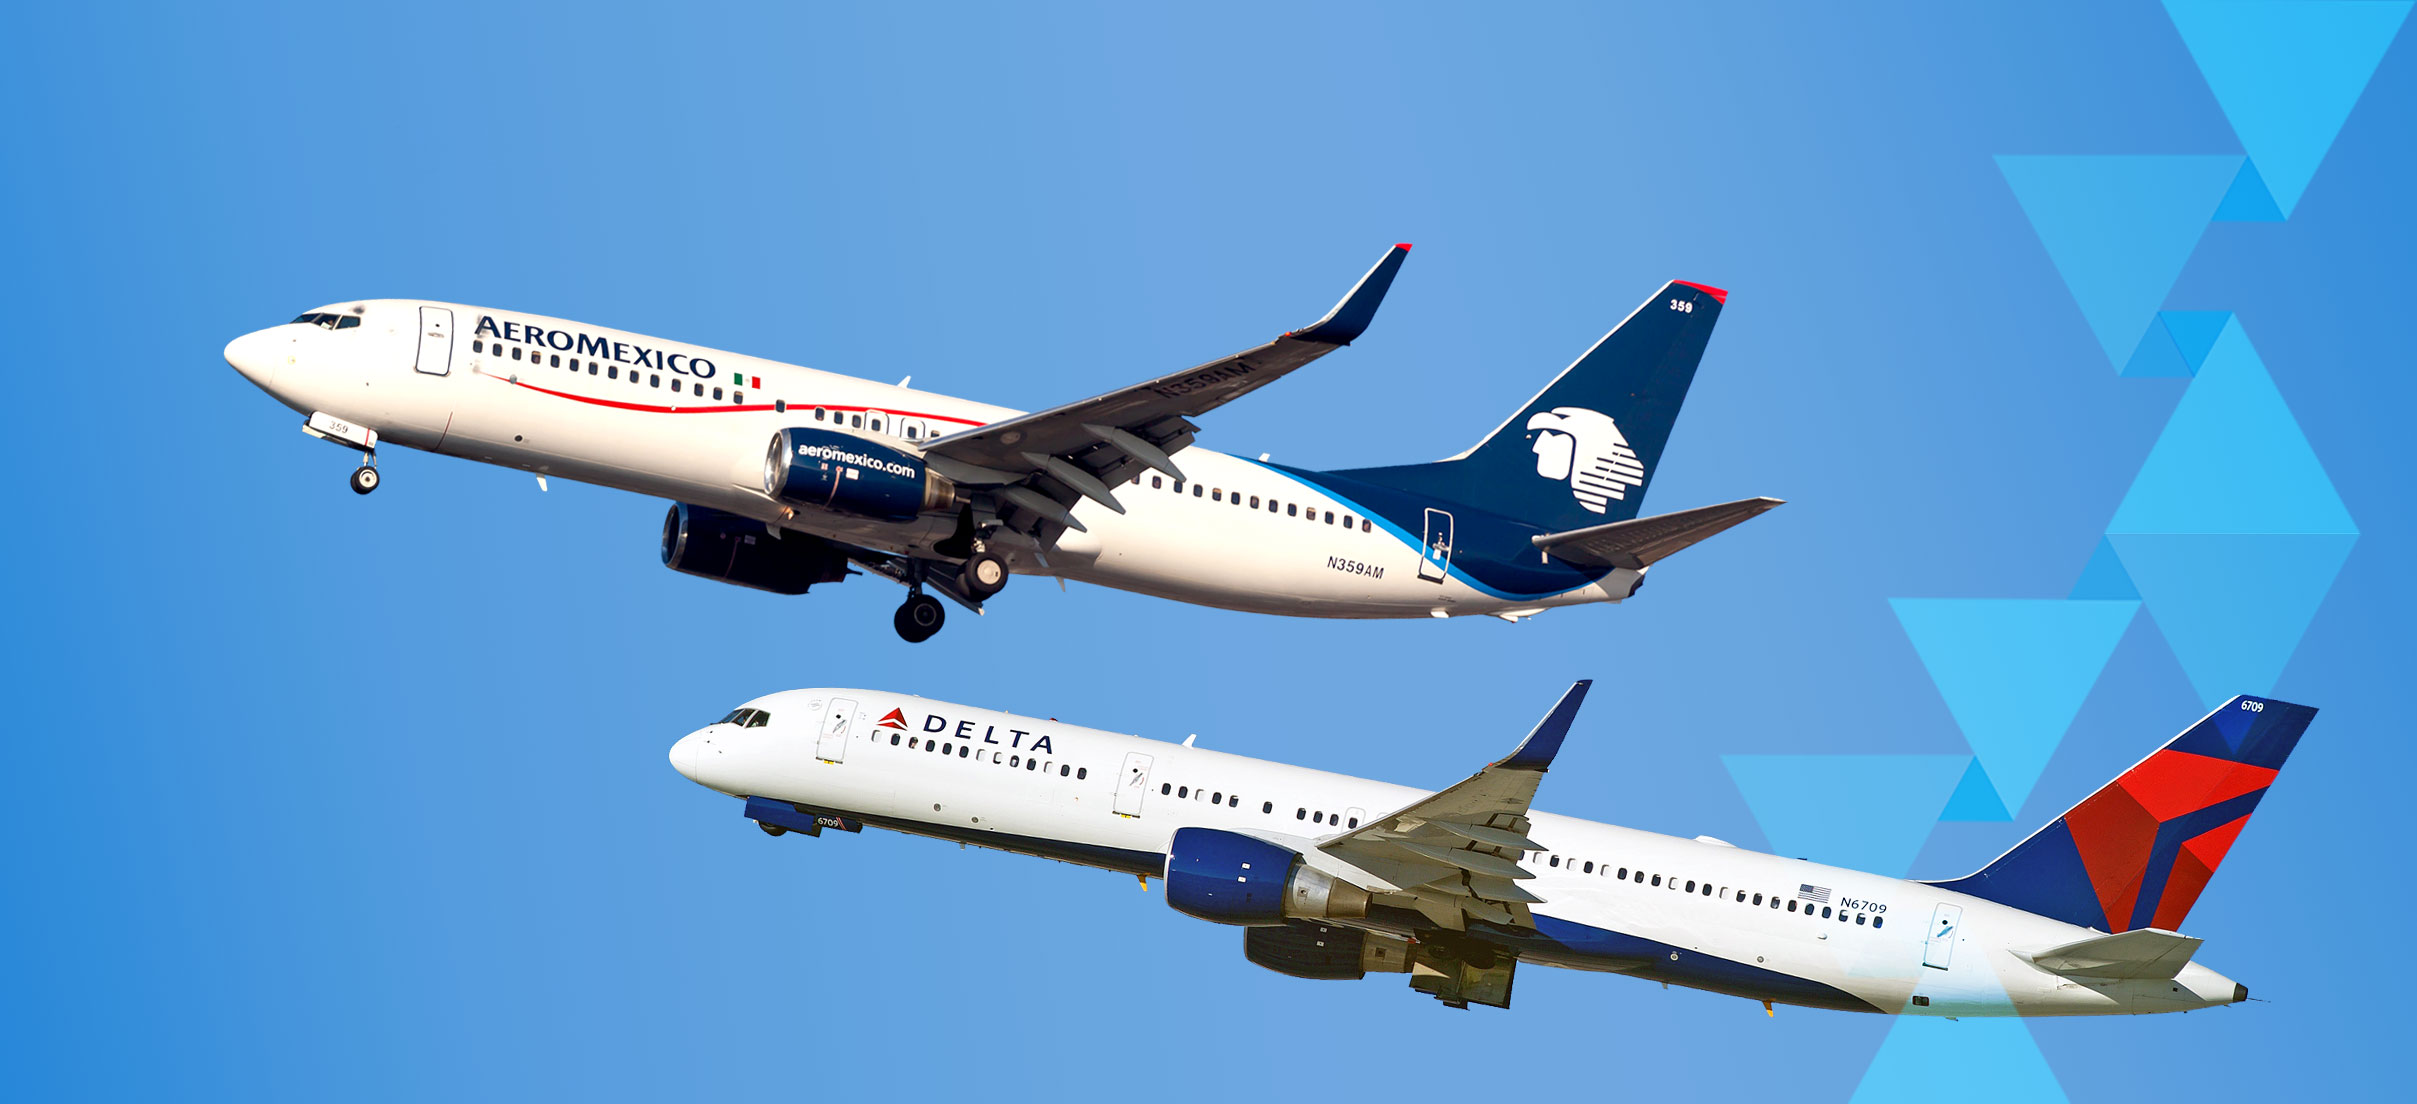 Delta forms a bloc to defend its alliance with Aeromexico